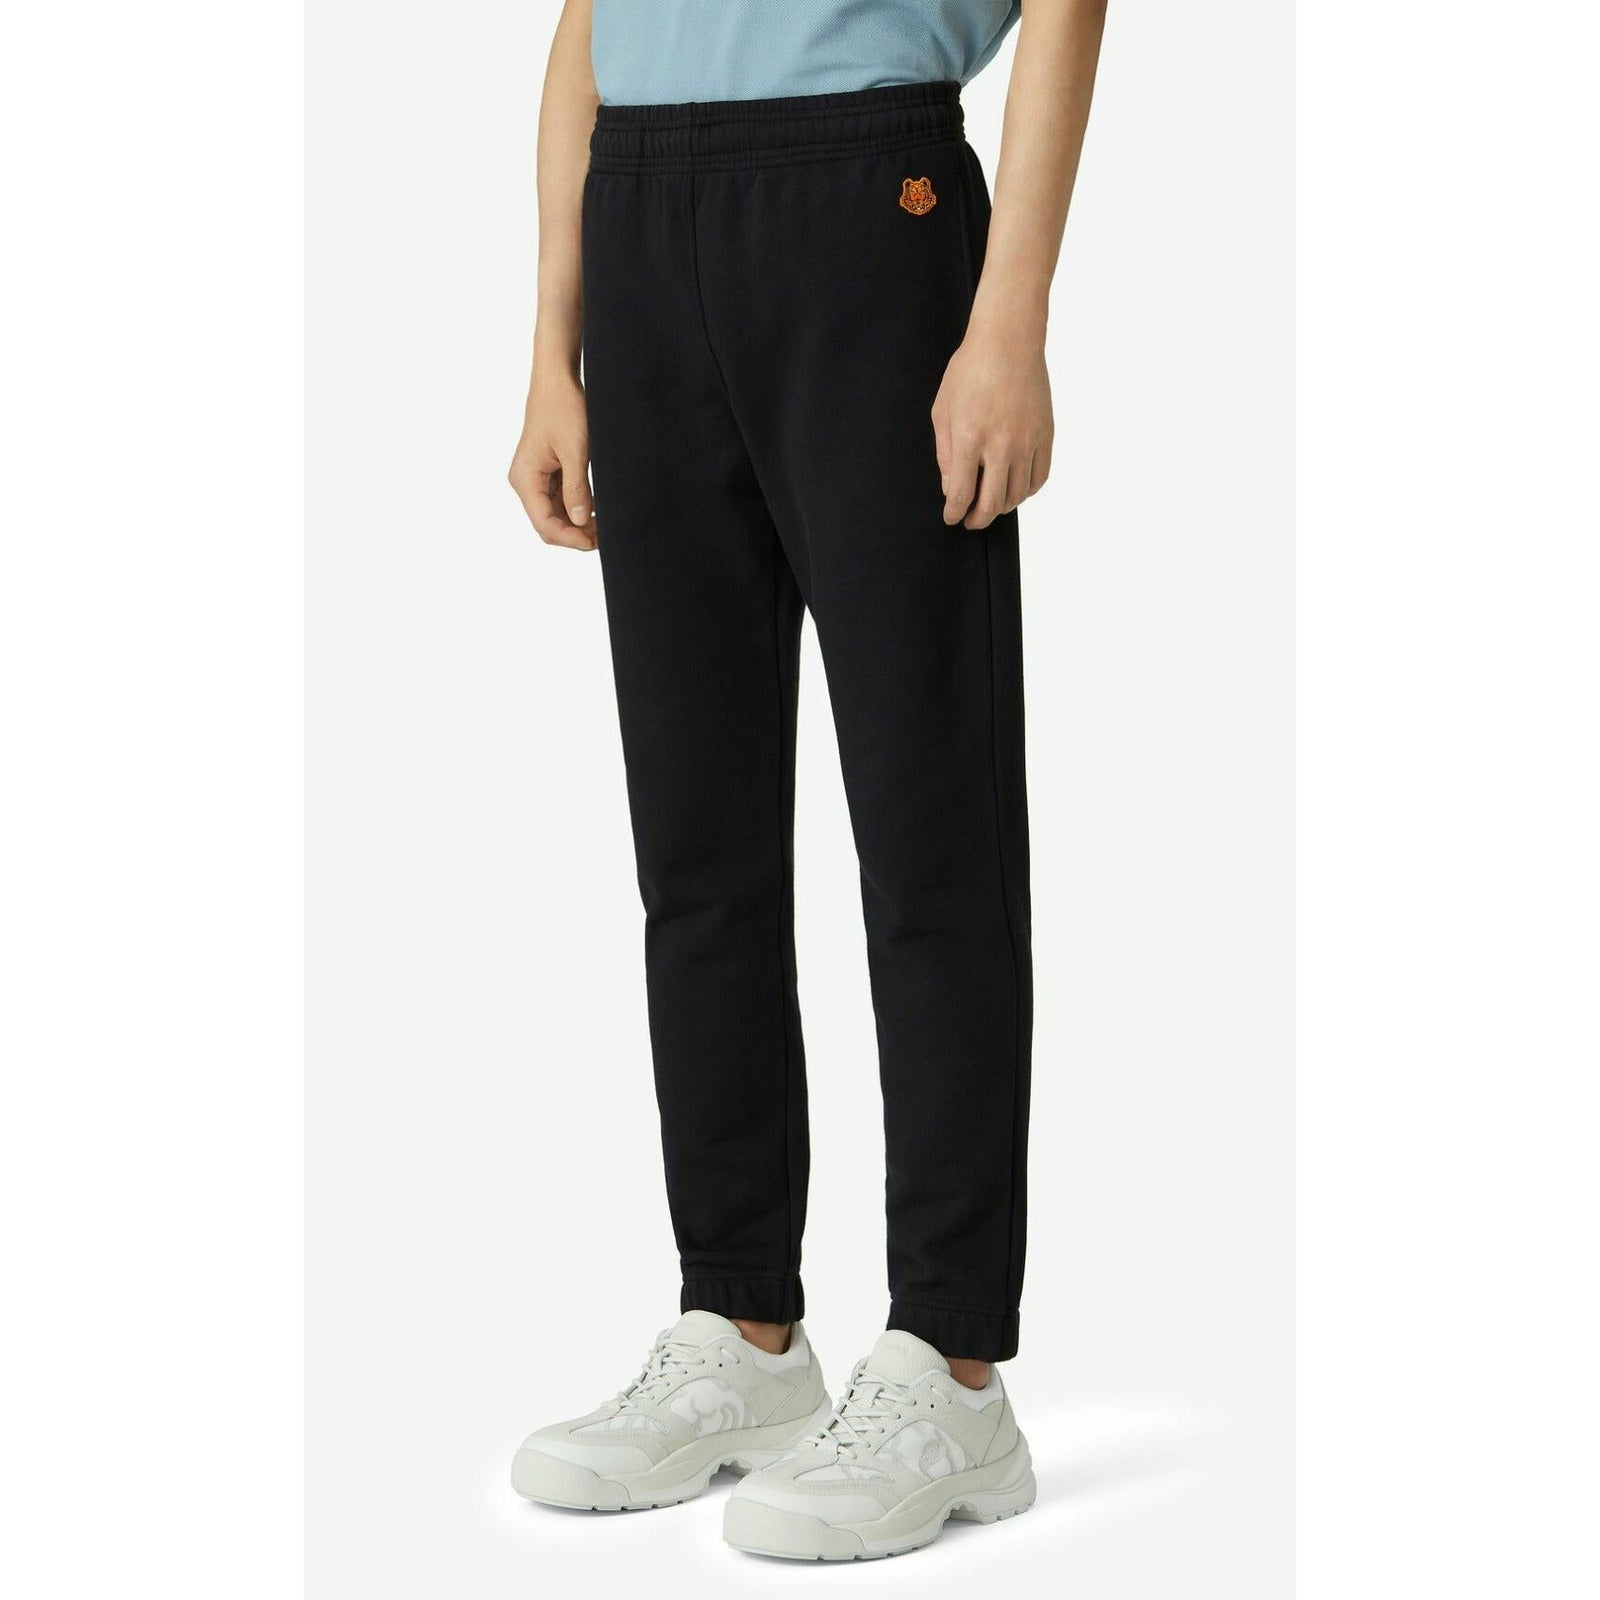 TIGER CREST JOGGING TROUSERS - Yooto